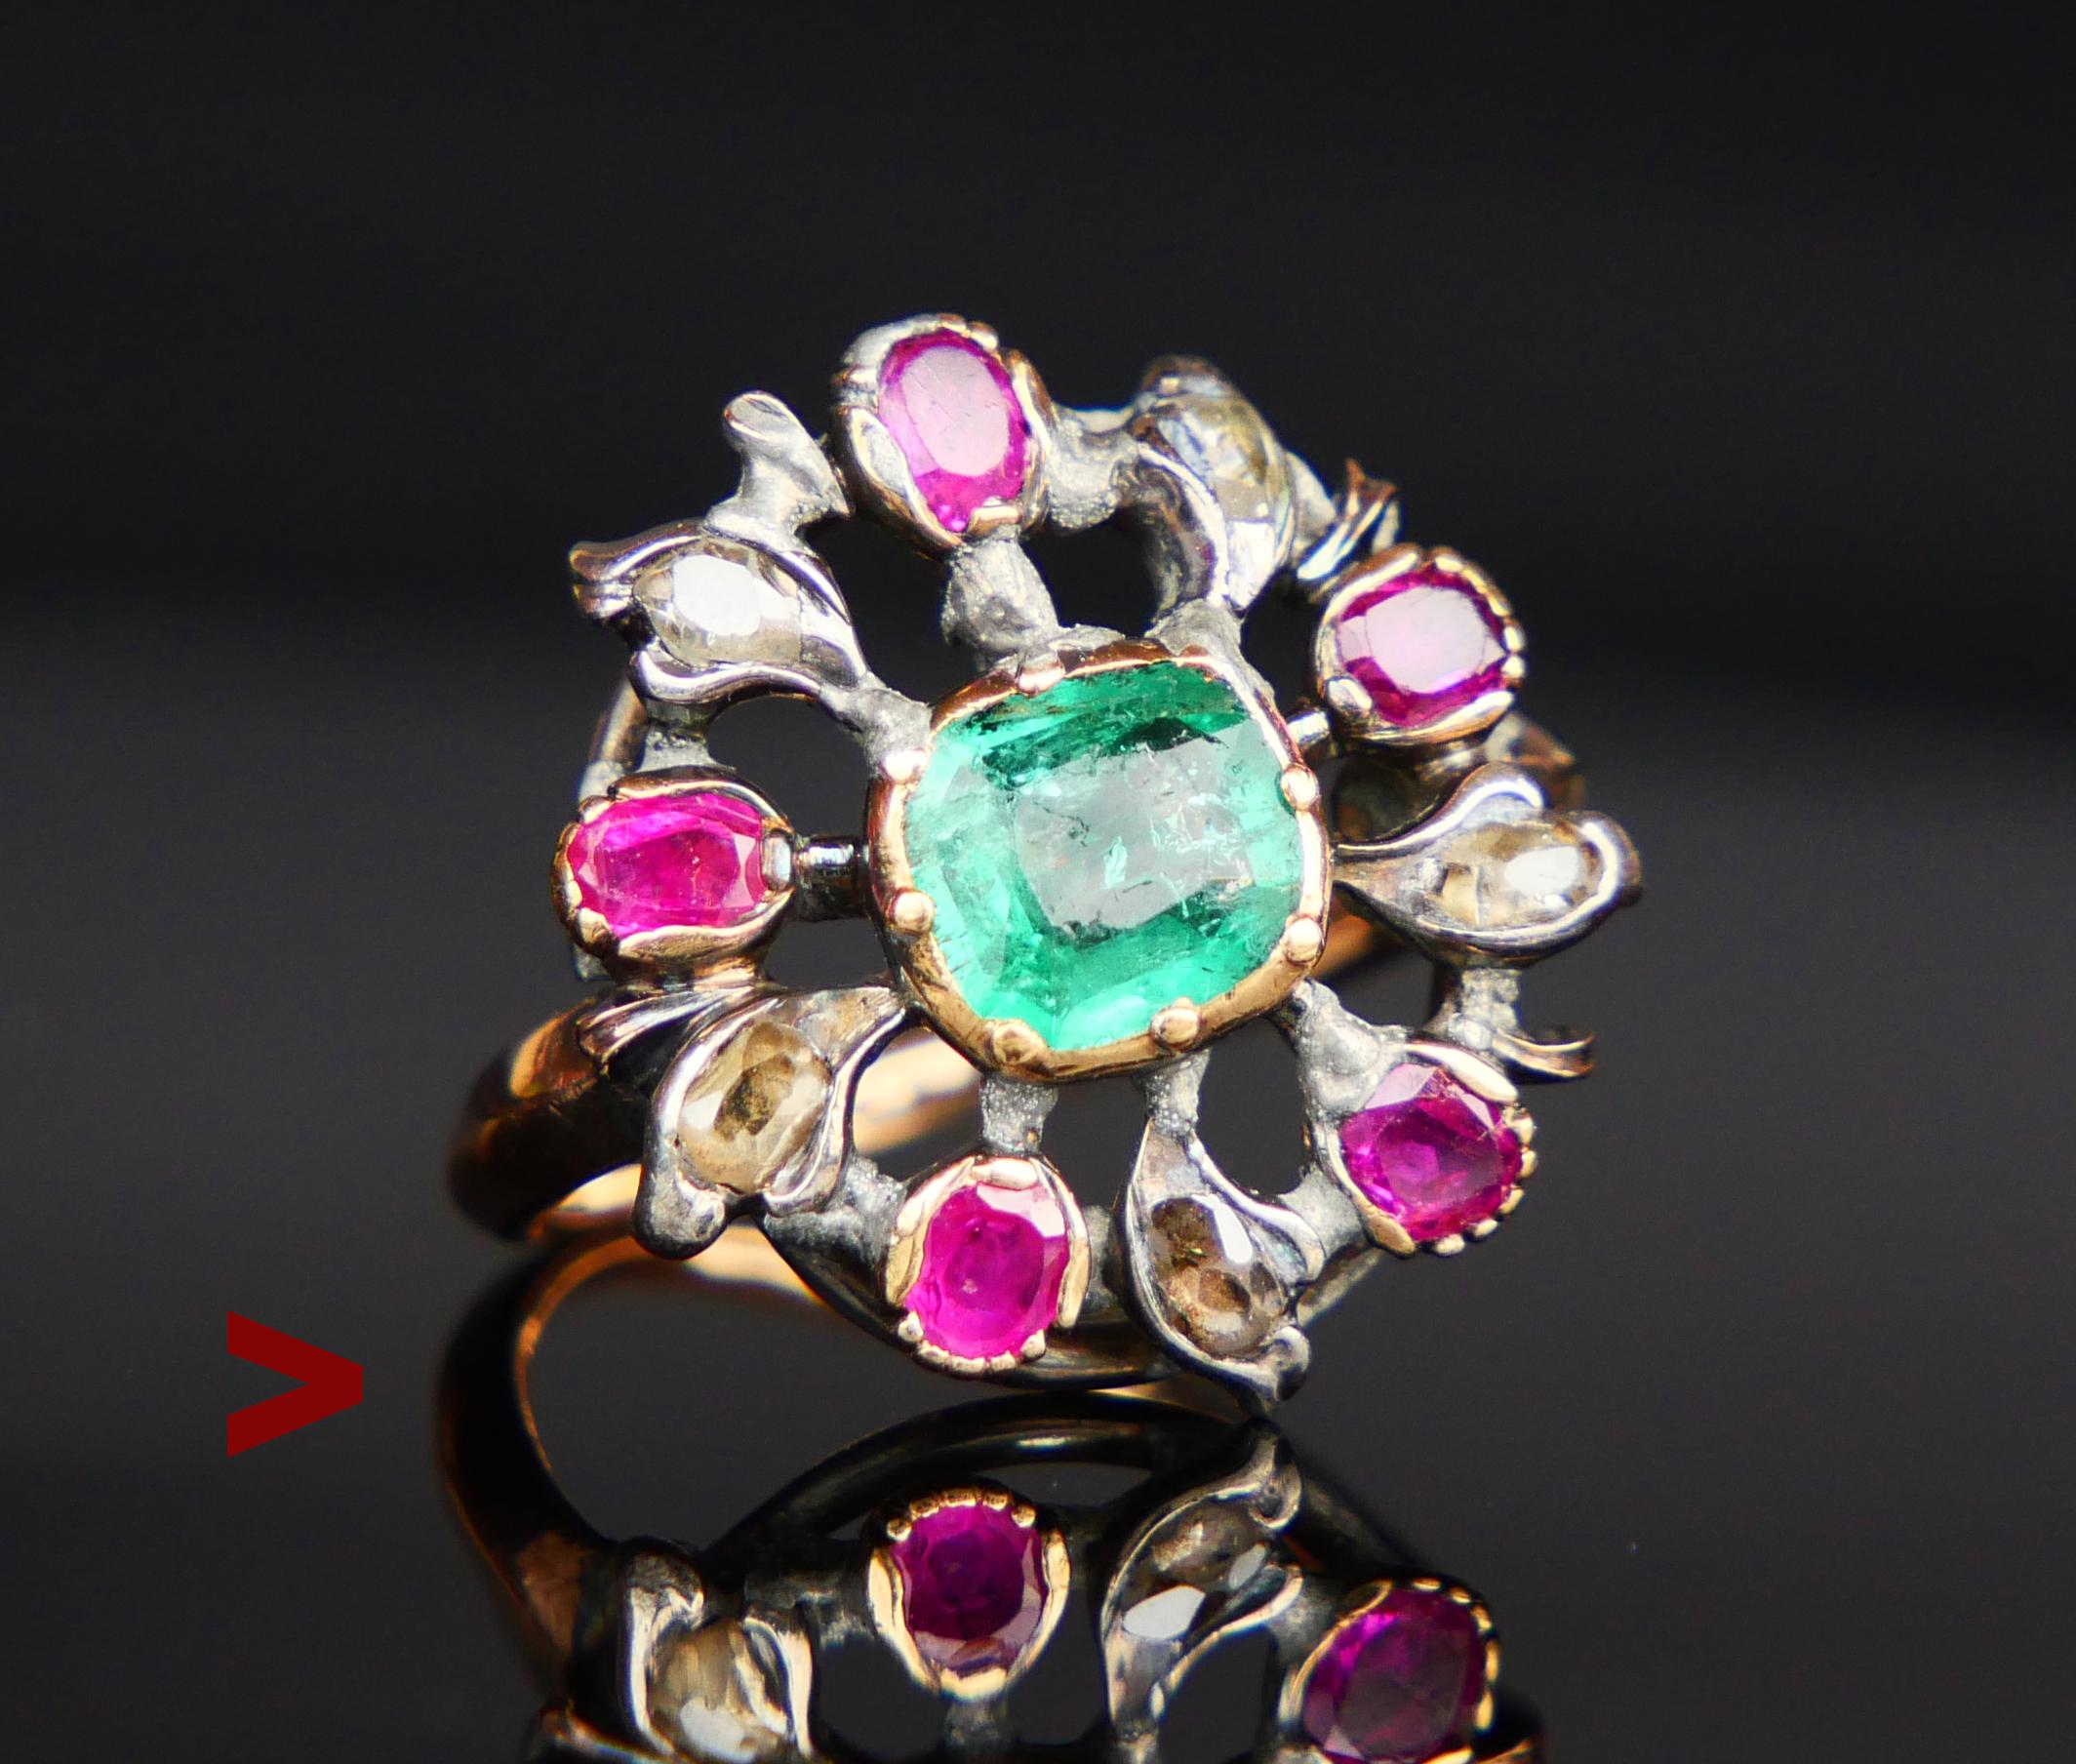 Ca. middle/late 18th. century ring, 14K Rose Gold band with a 'Giardinetto' (small garden) openwork crown with Silver and Yellow Gold top. Array of foiled back natural Emerald, natural Rubies, and Diamonds. No hallmarks, band tested solid 14K